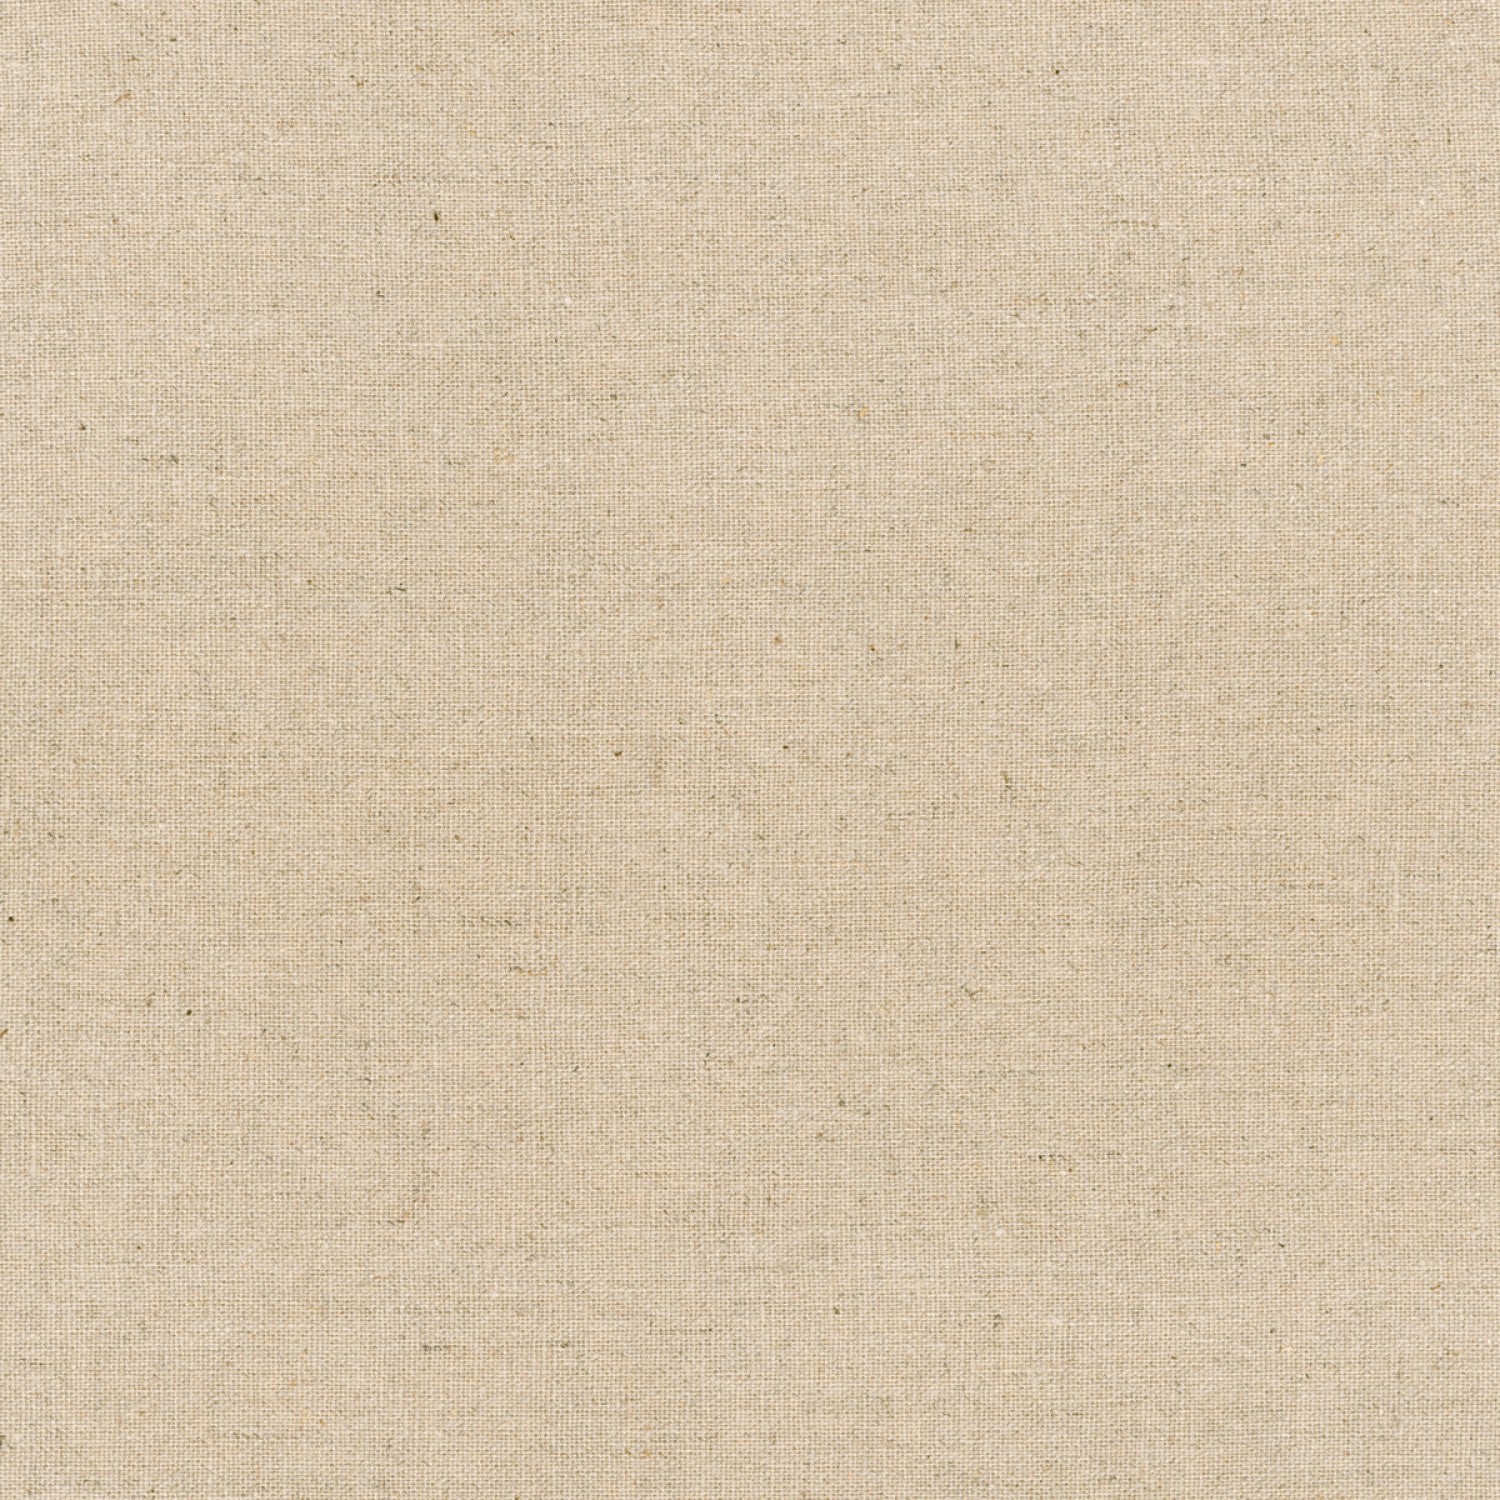 Solid Beige | Canvas